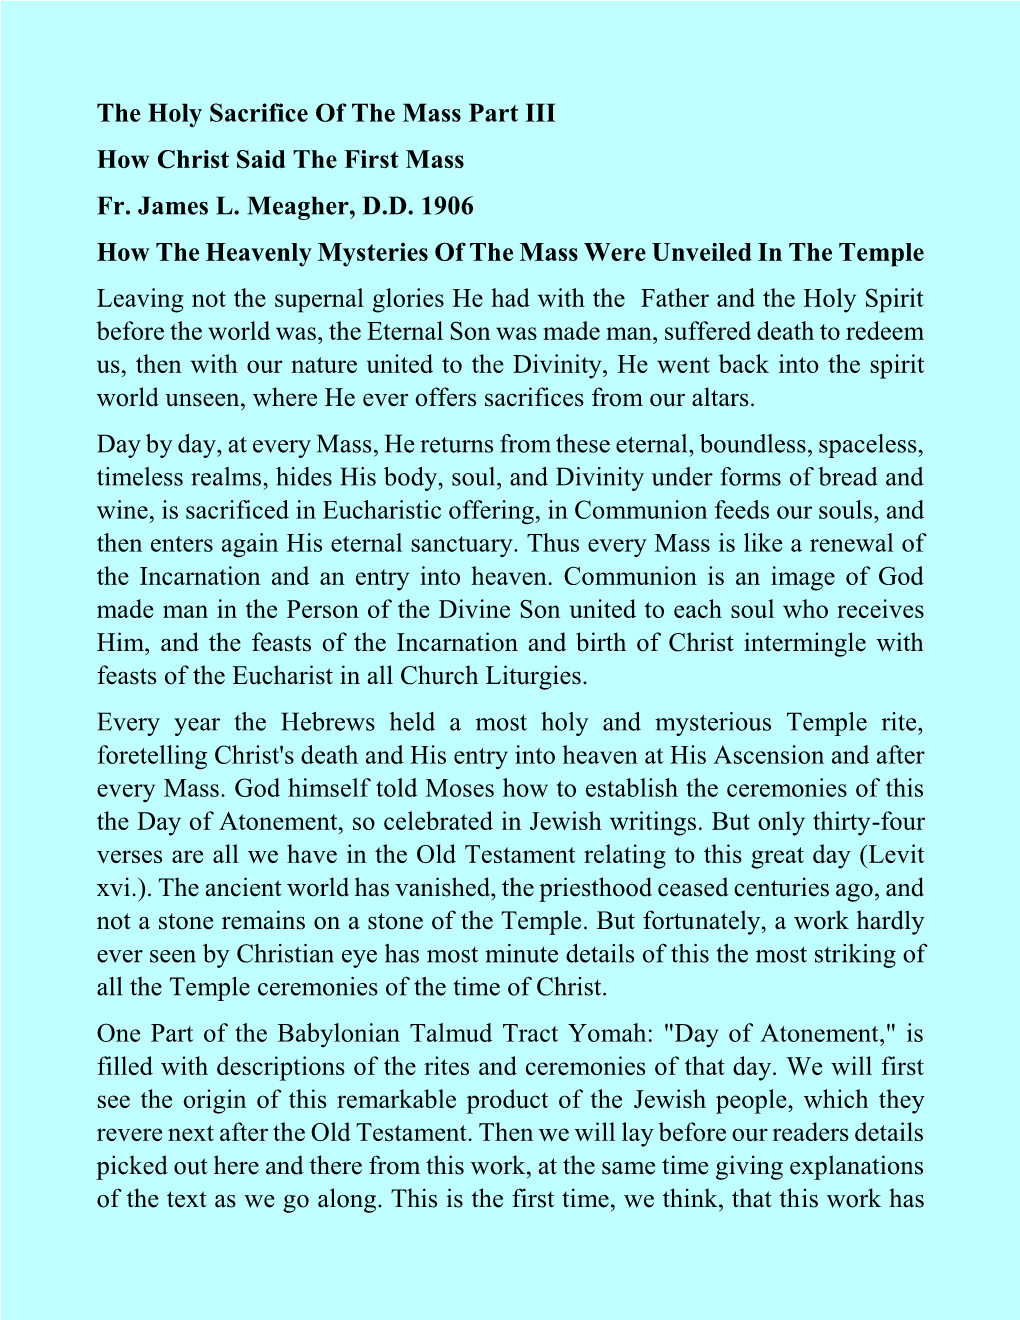 The Holy Sacrifice of the Mass Part III How Christ Said the First Mass Fr